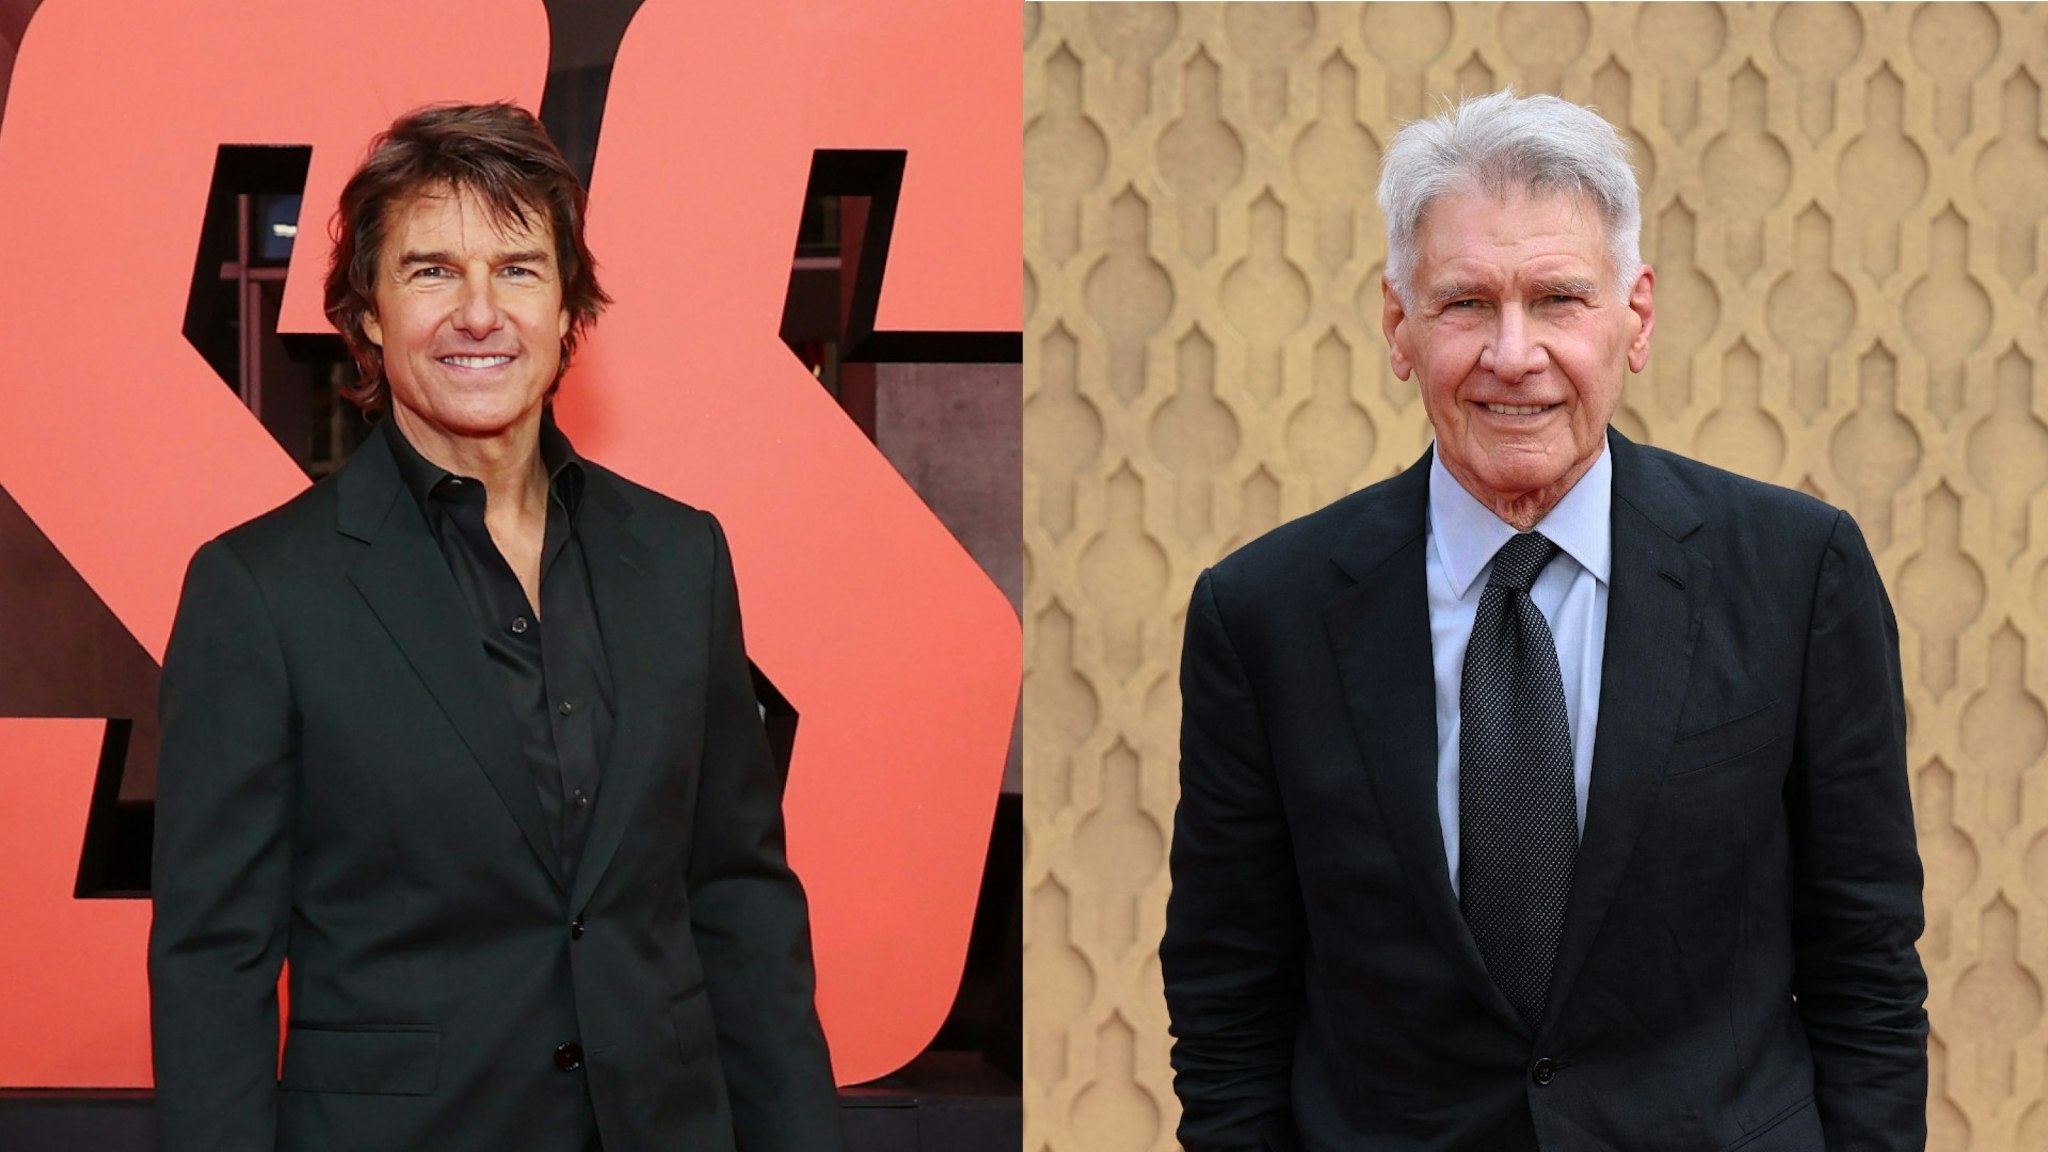 Tom Cruise attends the Australian premiere of "Mission: Impossible - Dead Reckoning Part One" on July 03, 2023 in Sydney, Australia. Harrison Ford attends the "Indiana Jones And The Dial Of Destiny" UK Premiere at Cineworld Leicester Square on June 26, 2023 in London, England.